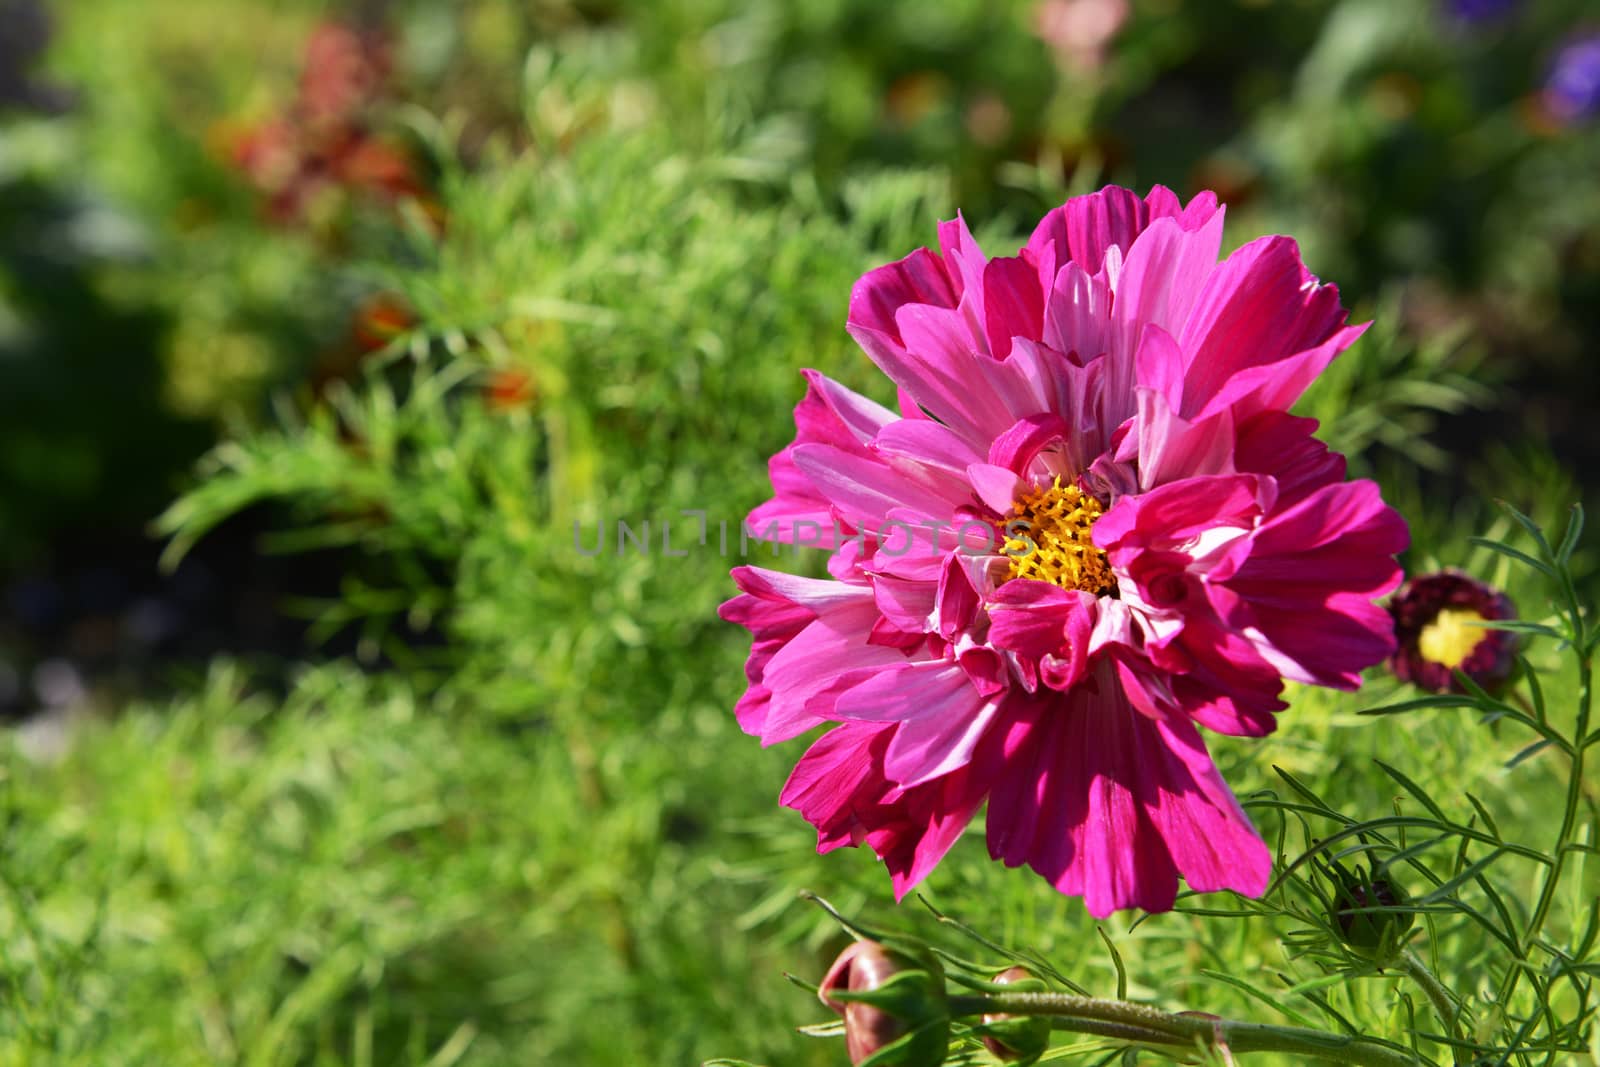 Pink and magenta Double Click cosmos flower blooming in sunshine above frondy green foliage